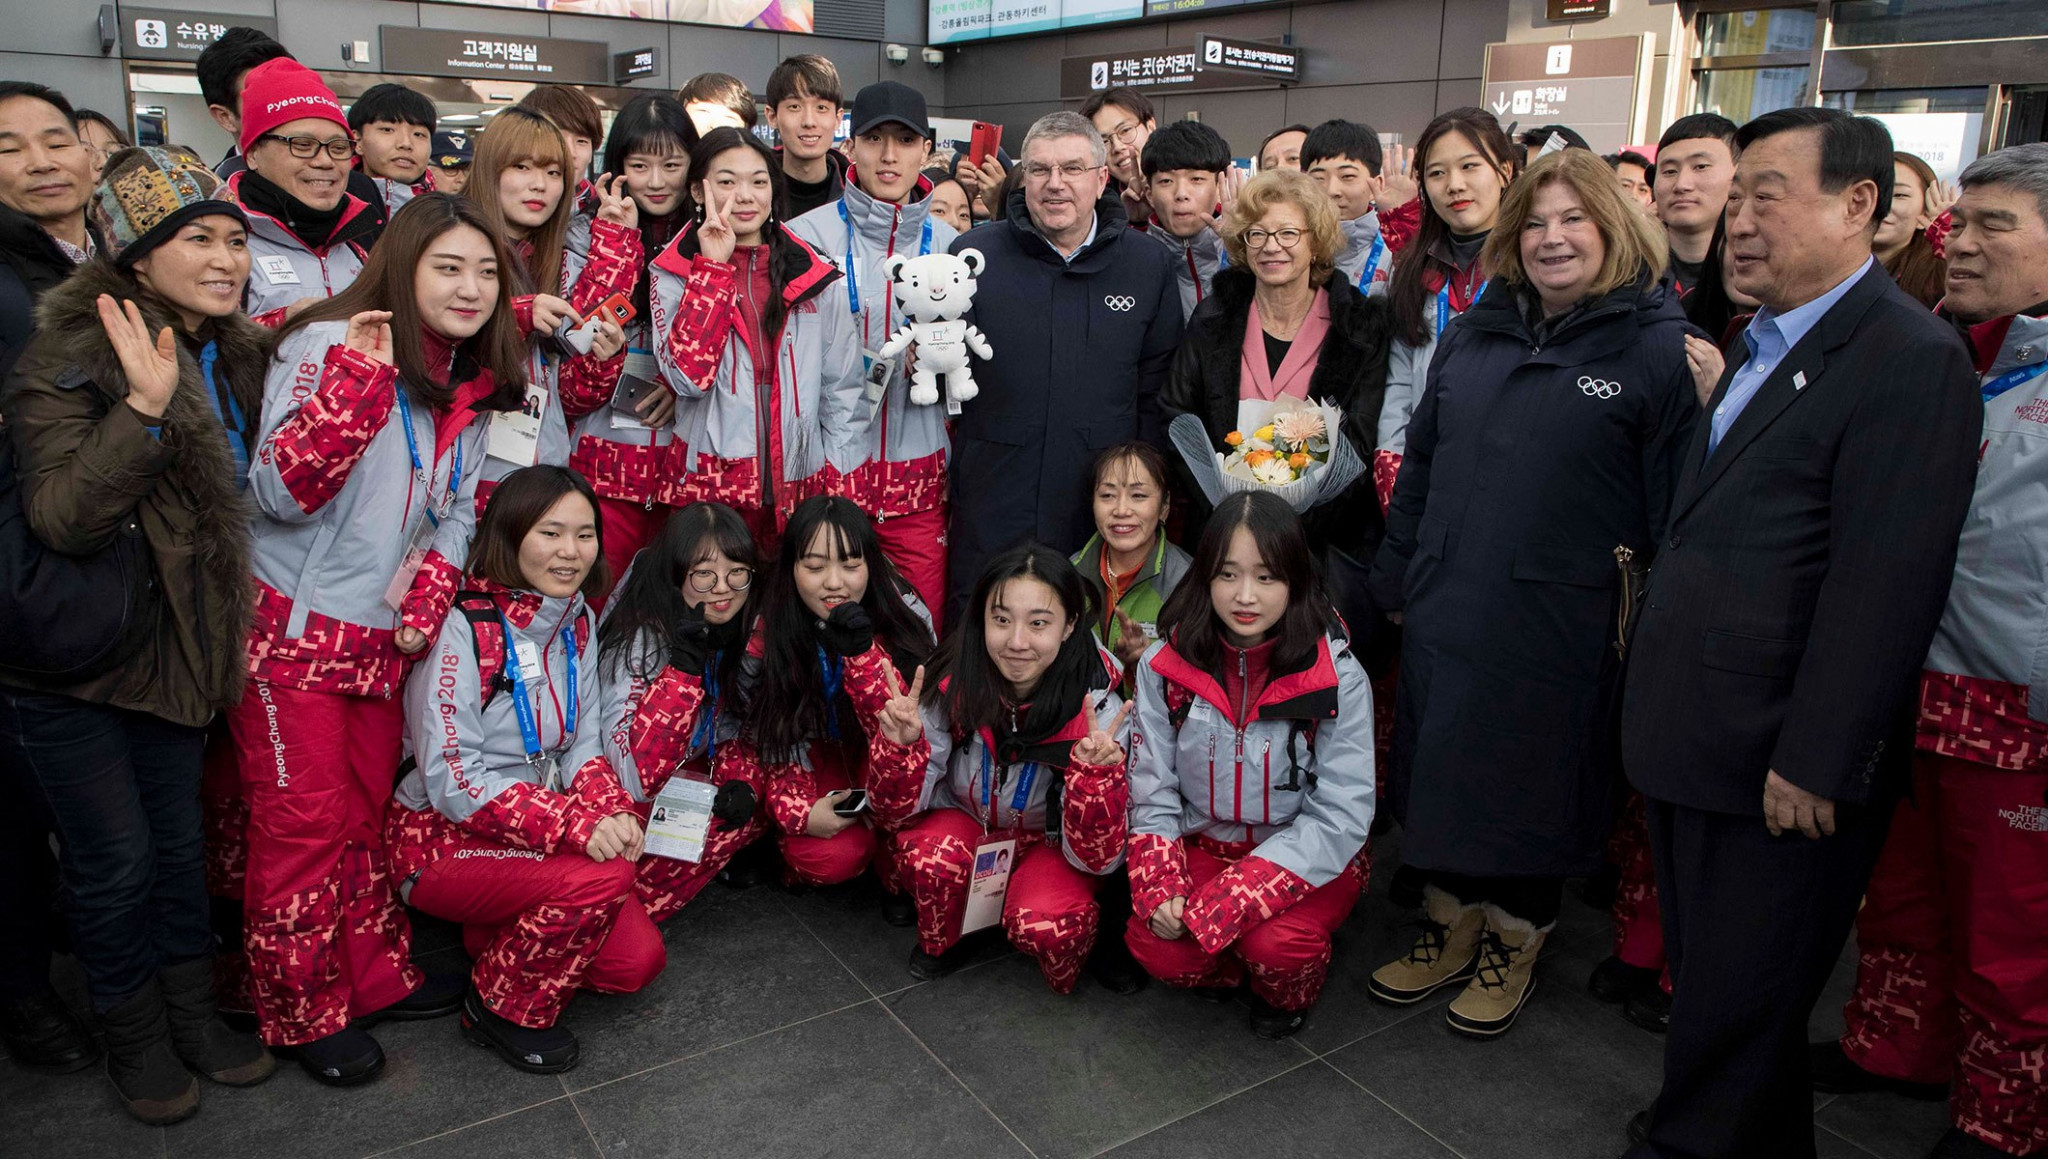 IOC President Thomas Bach arrived in Pyeongchang today ©Getty Images